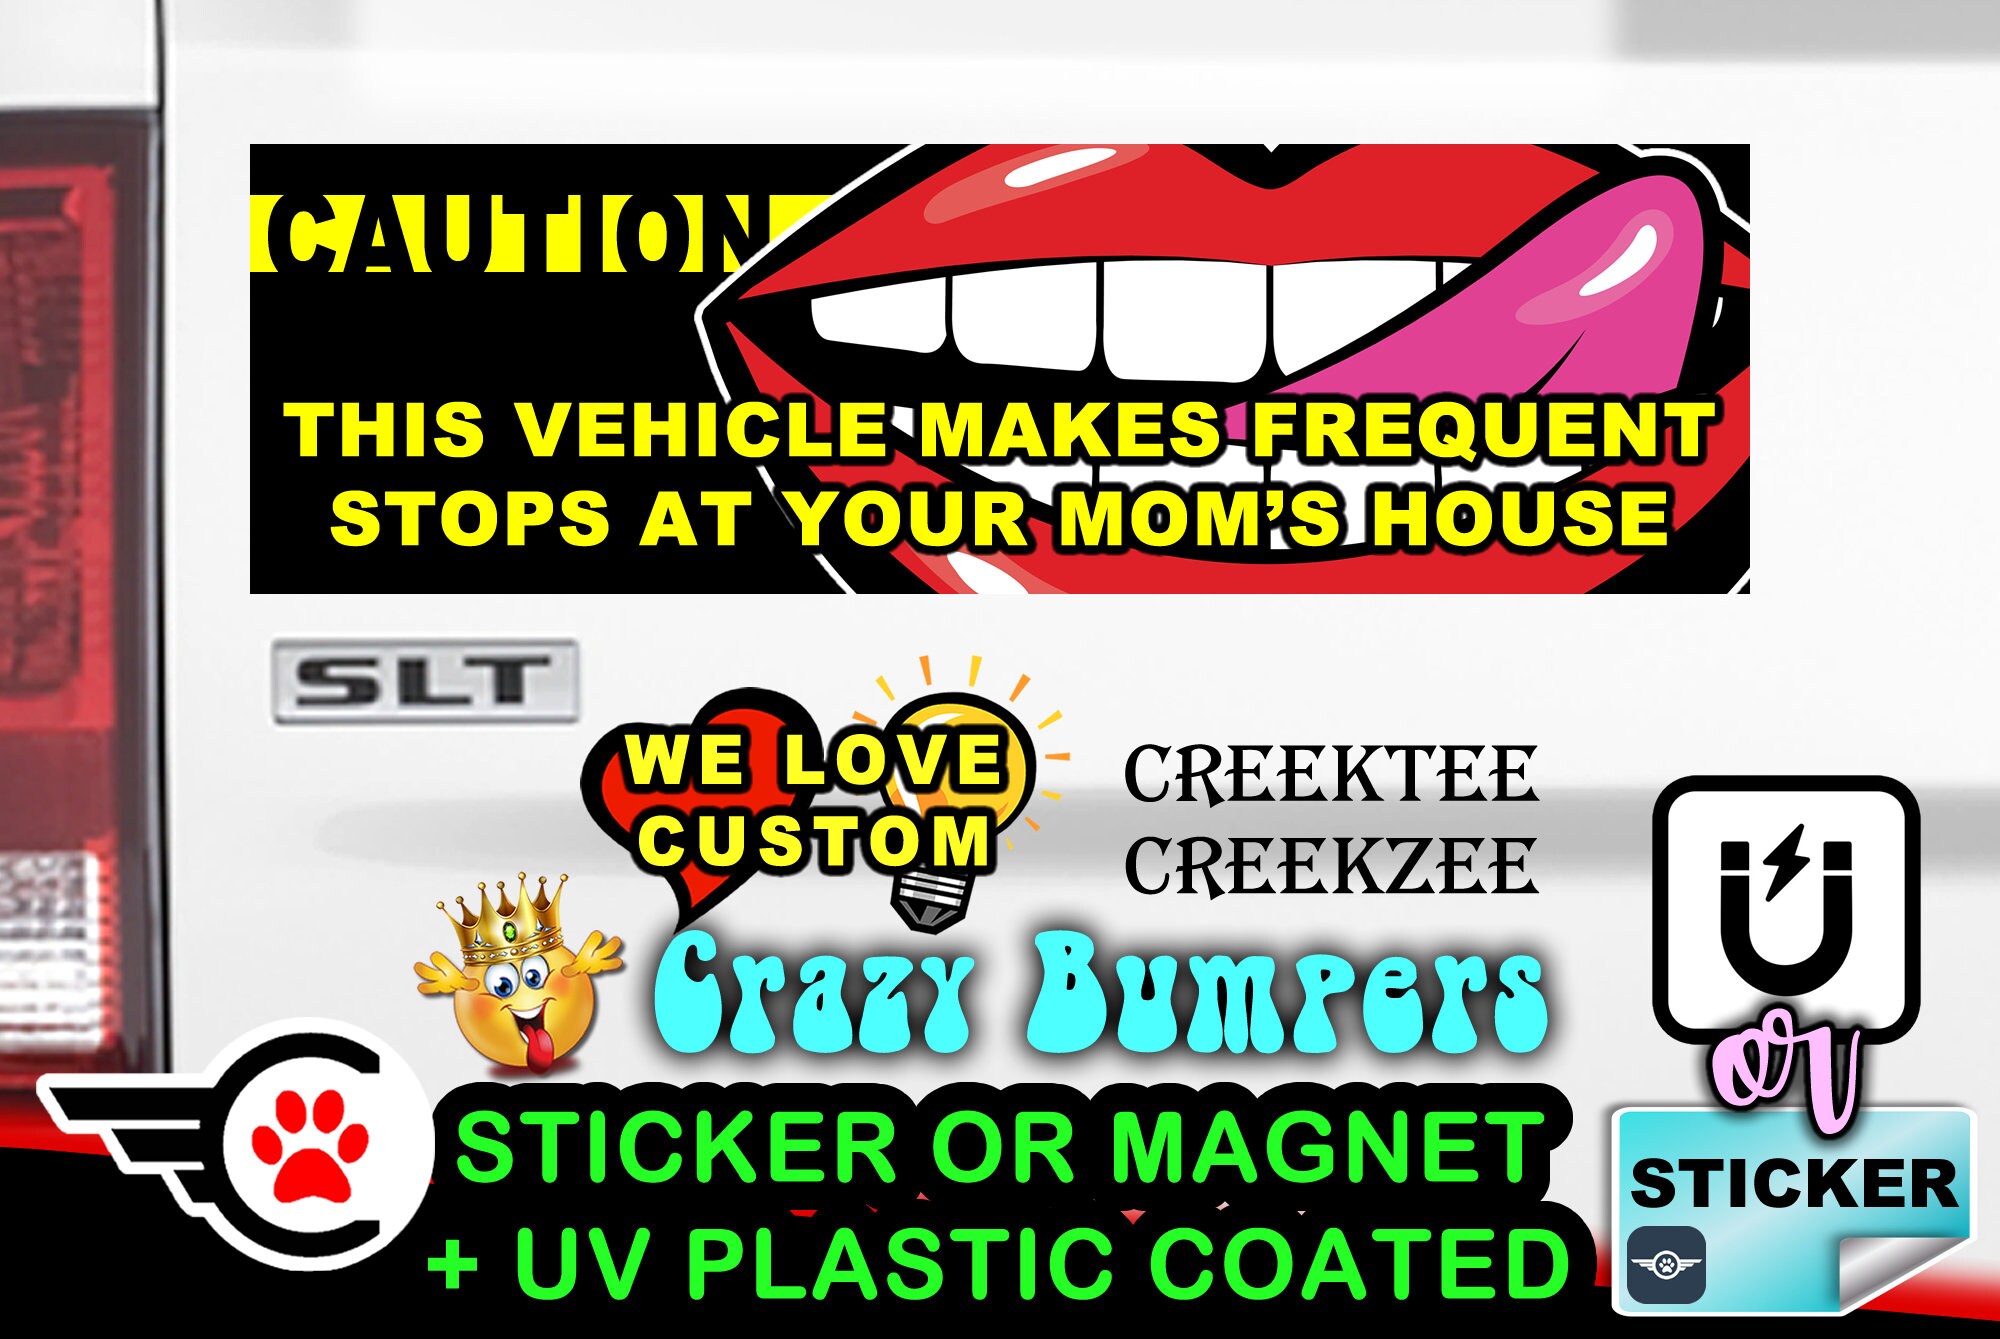 Caution This Vehicle Makes Frequent Stops At Your Moms House 10 x 3 Bumper Sticker or Magnetic Bumper Sticker Available